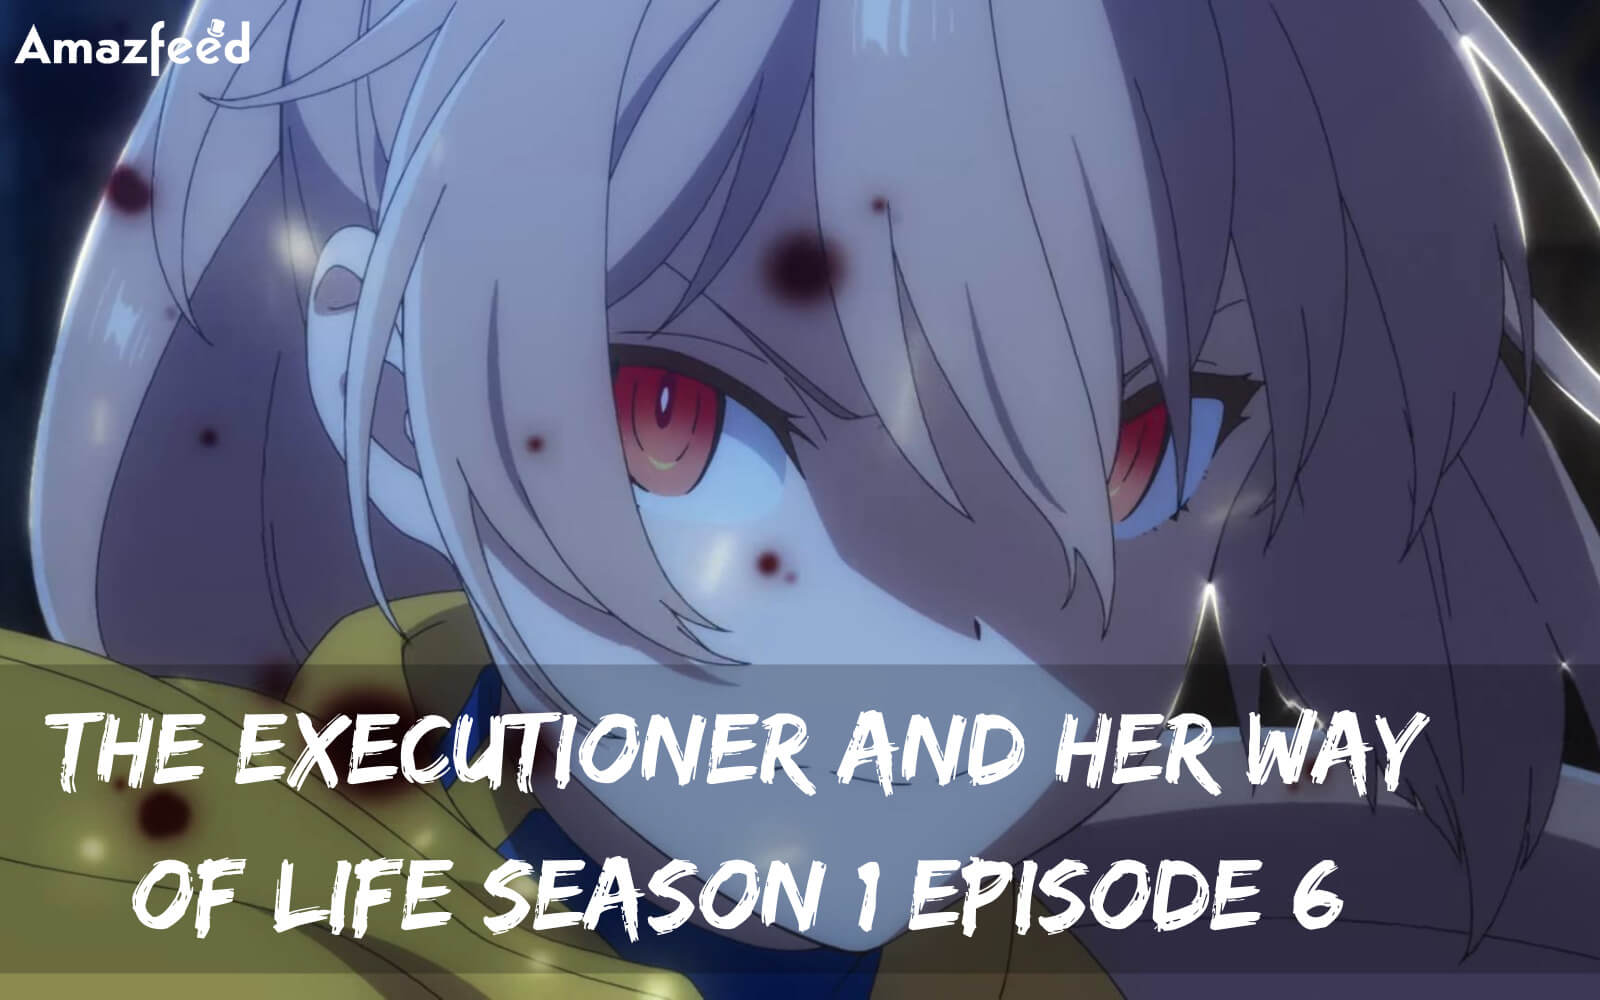 The Executioner and Her Way of Life Season 1 Episode 7 release date